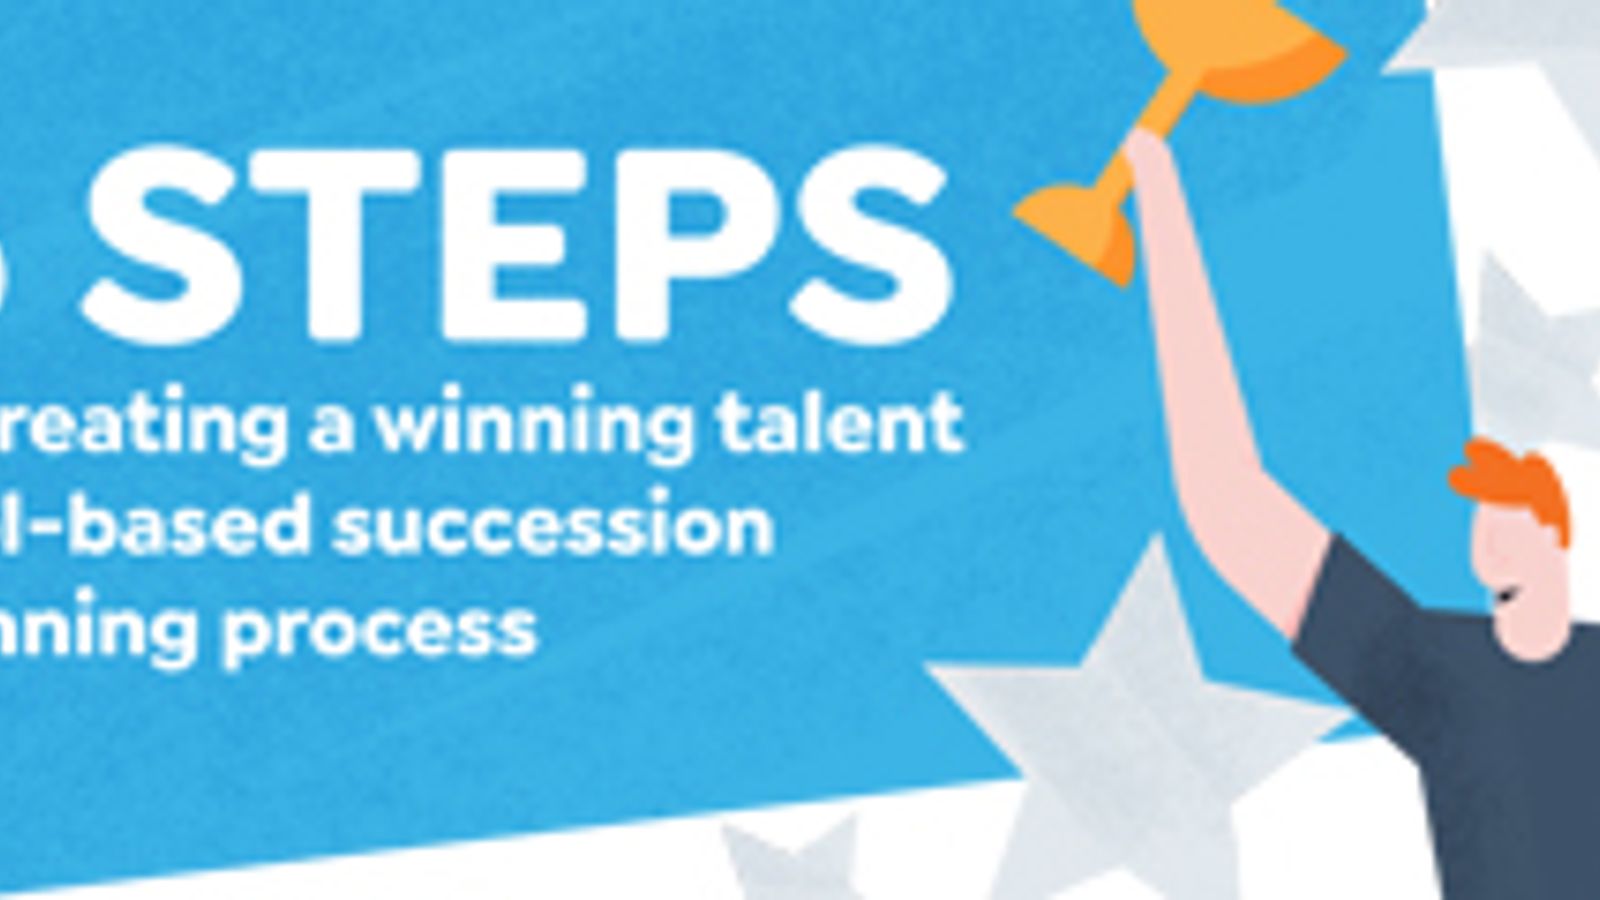 6 Steps to creating a winning talent pool-based succession planning process